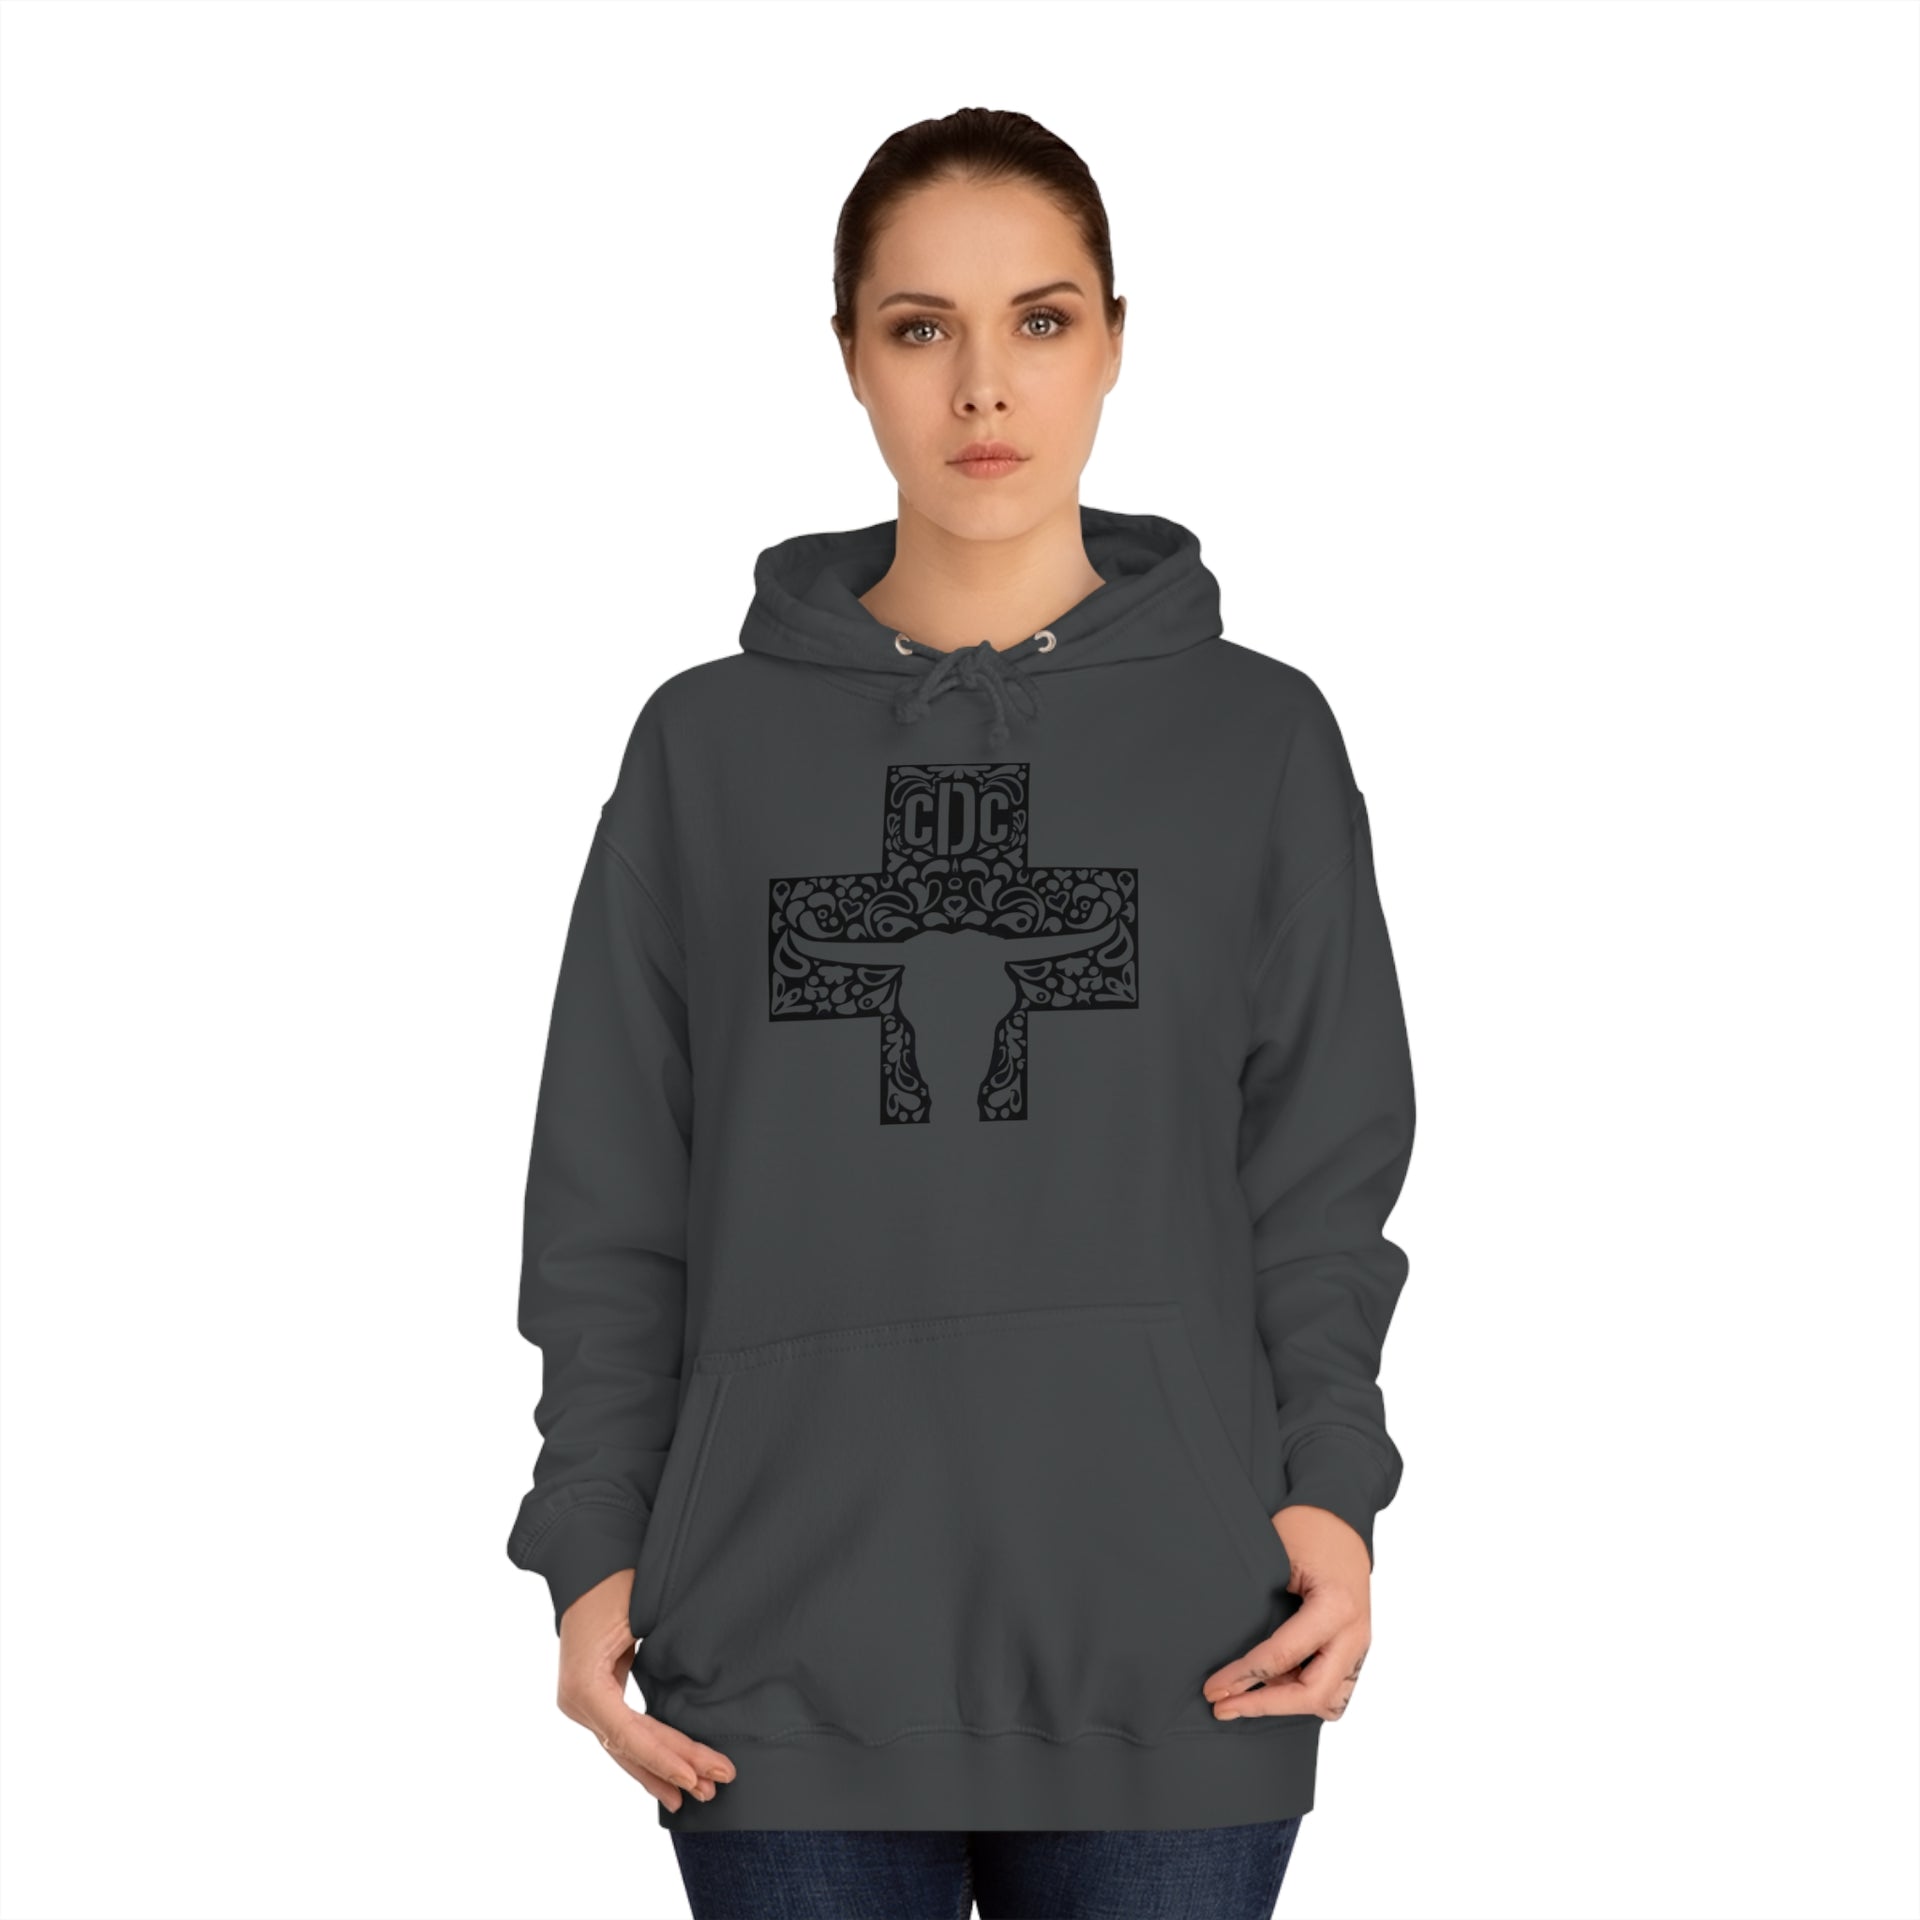 Lacy cDc unisex College Hoodie